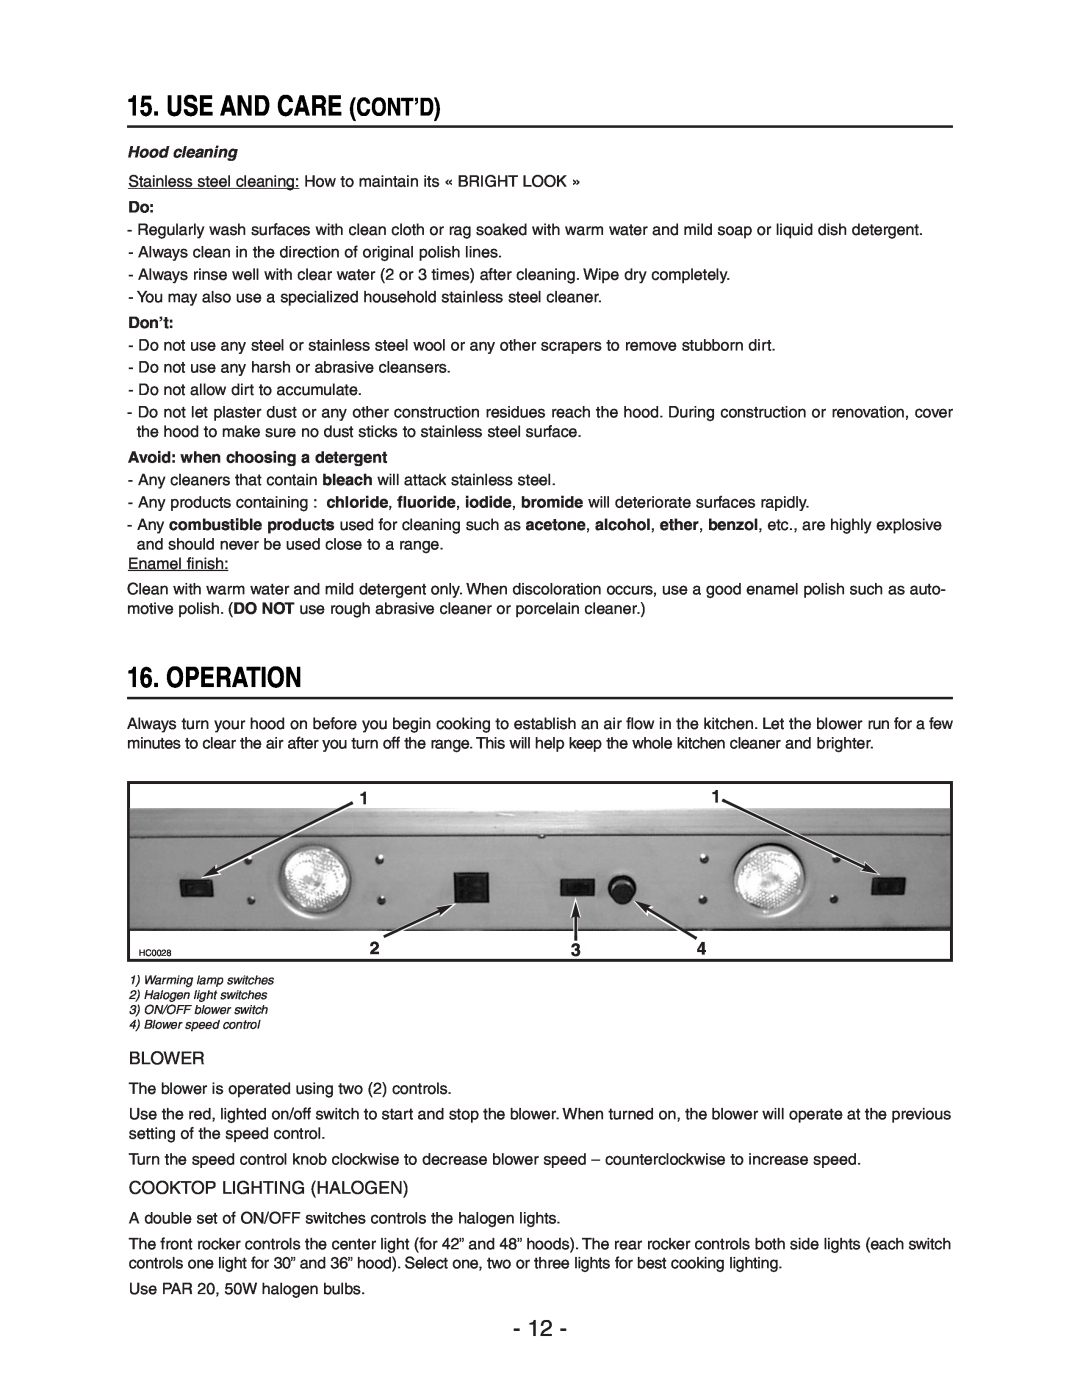 Broan 64000 installation instructions Use And Care Cont’D, Operation, Blower, Cooktop Lighting Halogen, Hood cleaning 